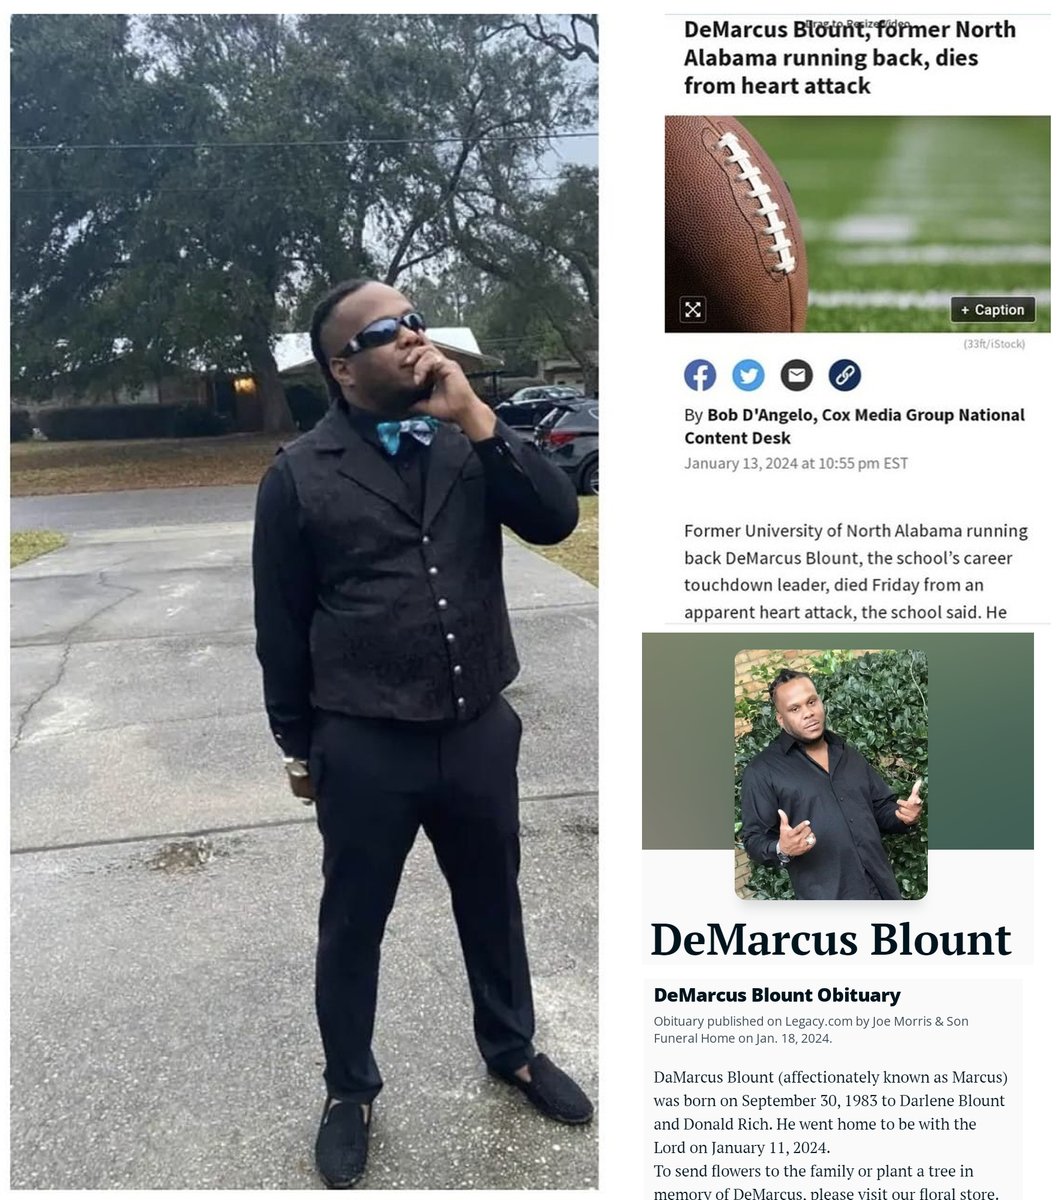 FOOTBALL PLAYER - Former University of North Alabama running back, 40 year old Demarcus Blount died suddenly on Jan.11, 2024 from a cardiac arrest 40 years old COVID-19 mRNA Vaccine sudden deaths are at an all time high #DiedSuddenly